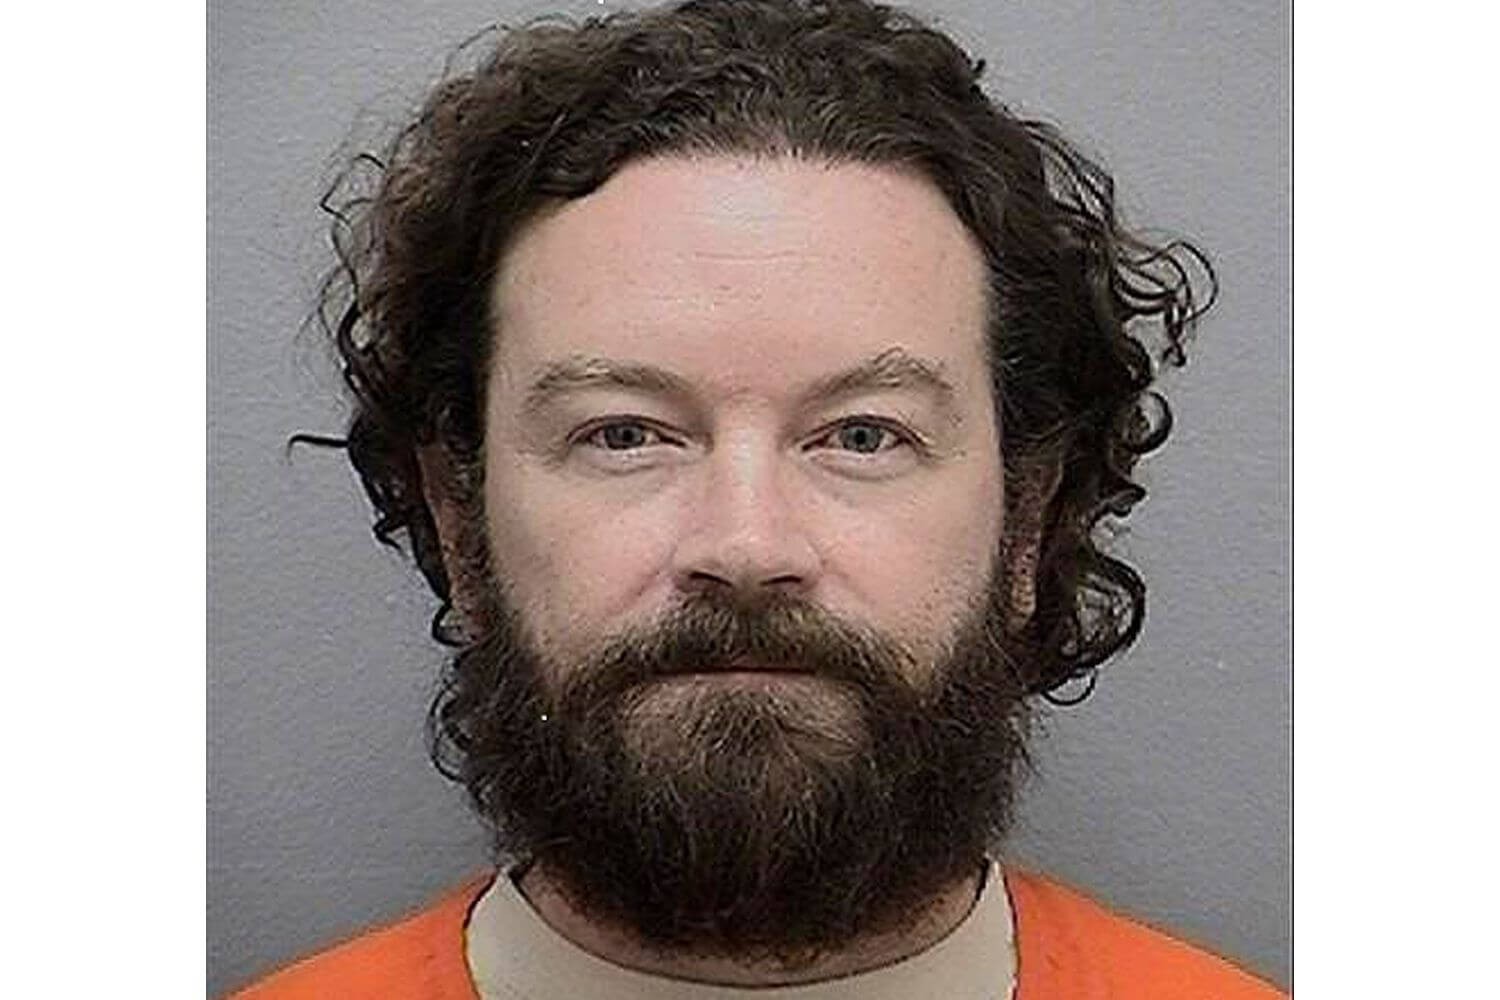 The Mugshot of Danny Masterson (Credit: People)